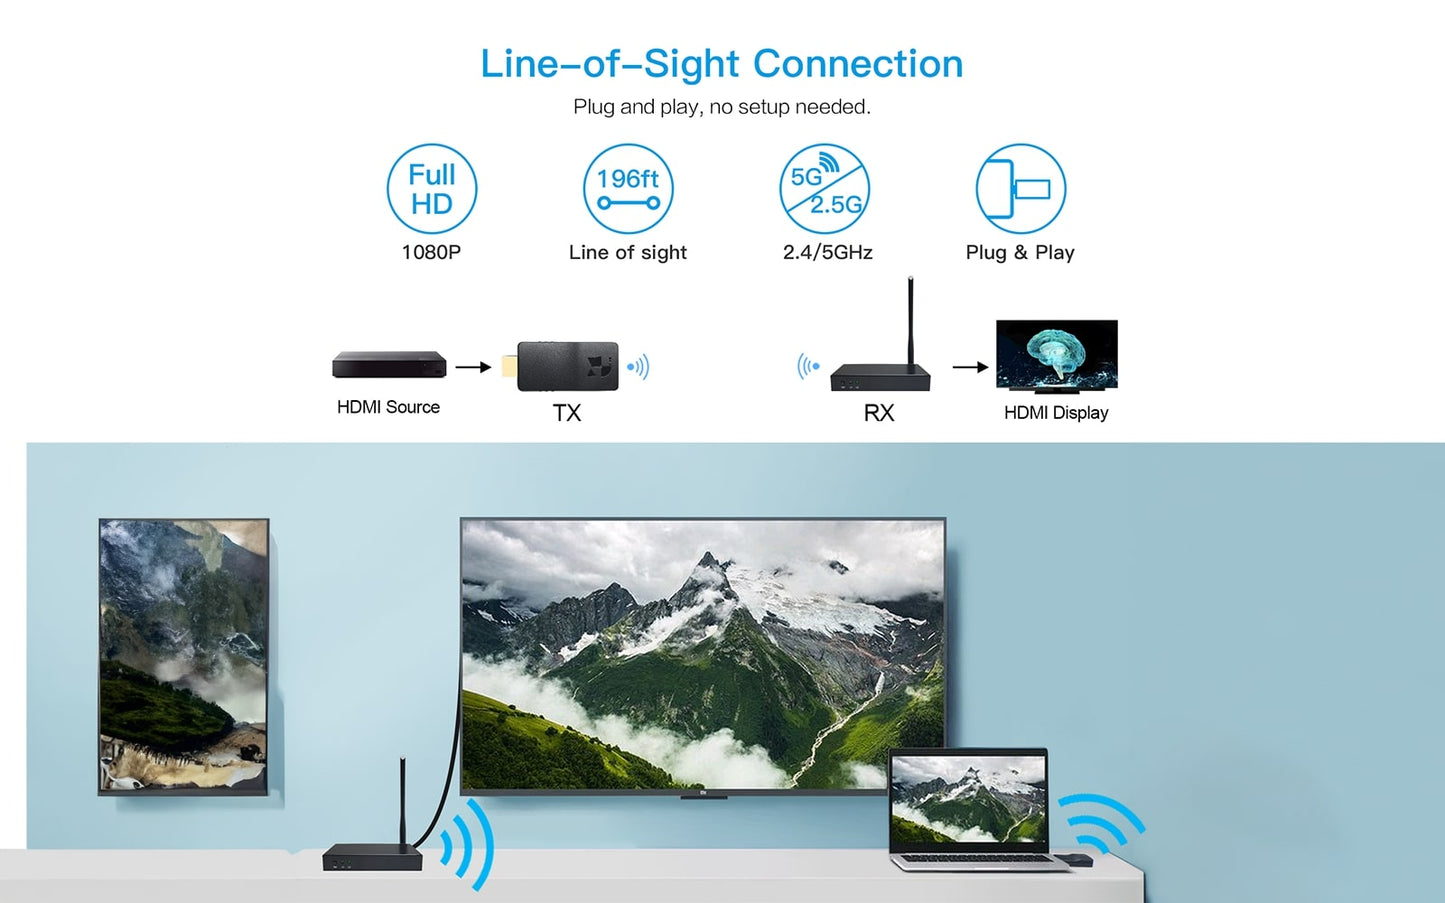 whe-15 wireless hdni video extender-line of sight connection